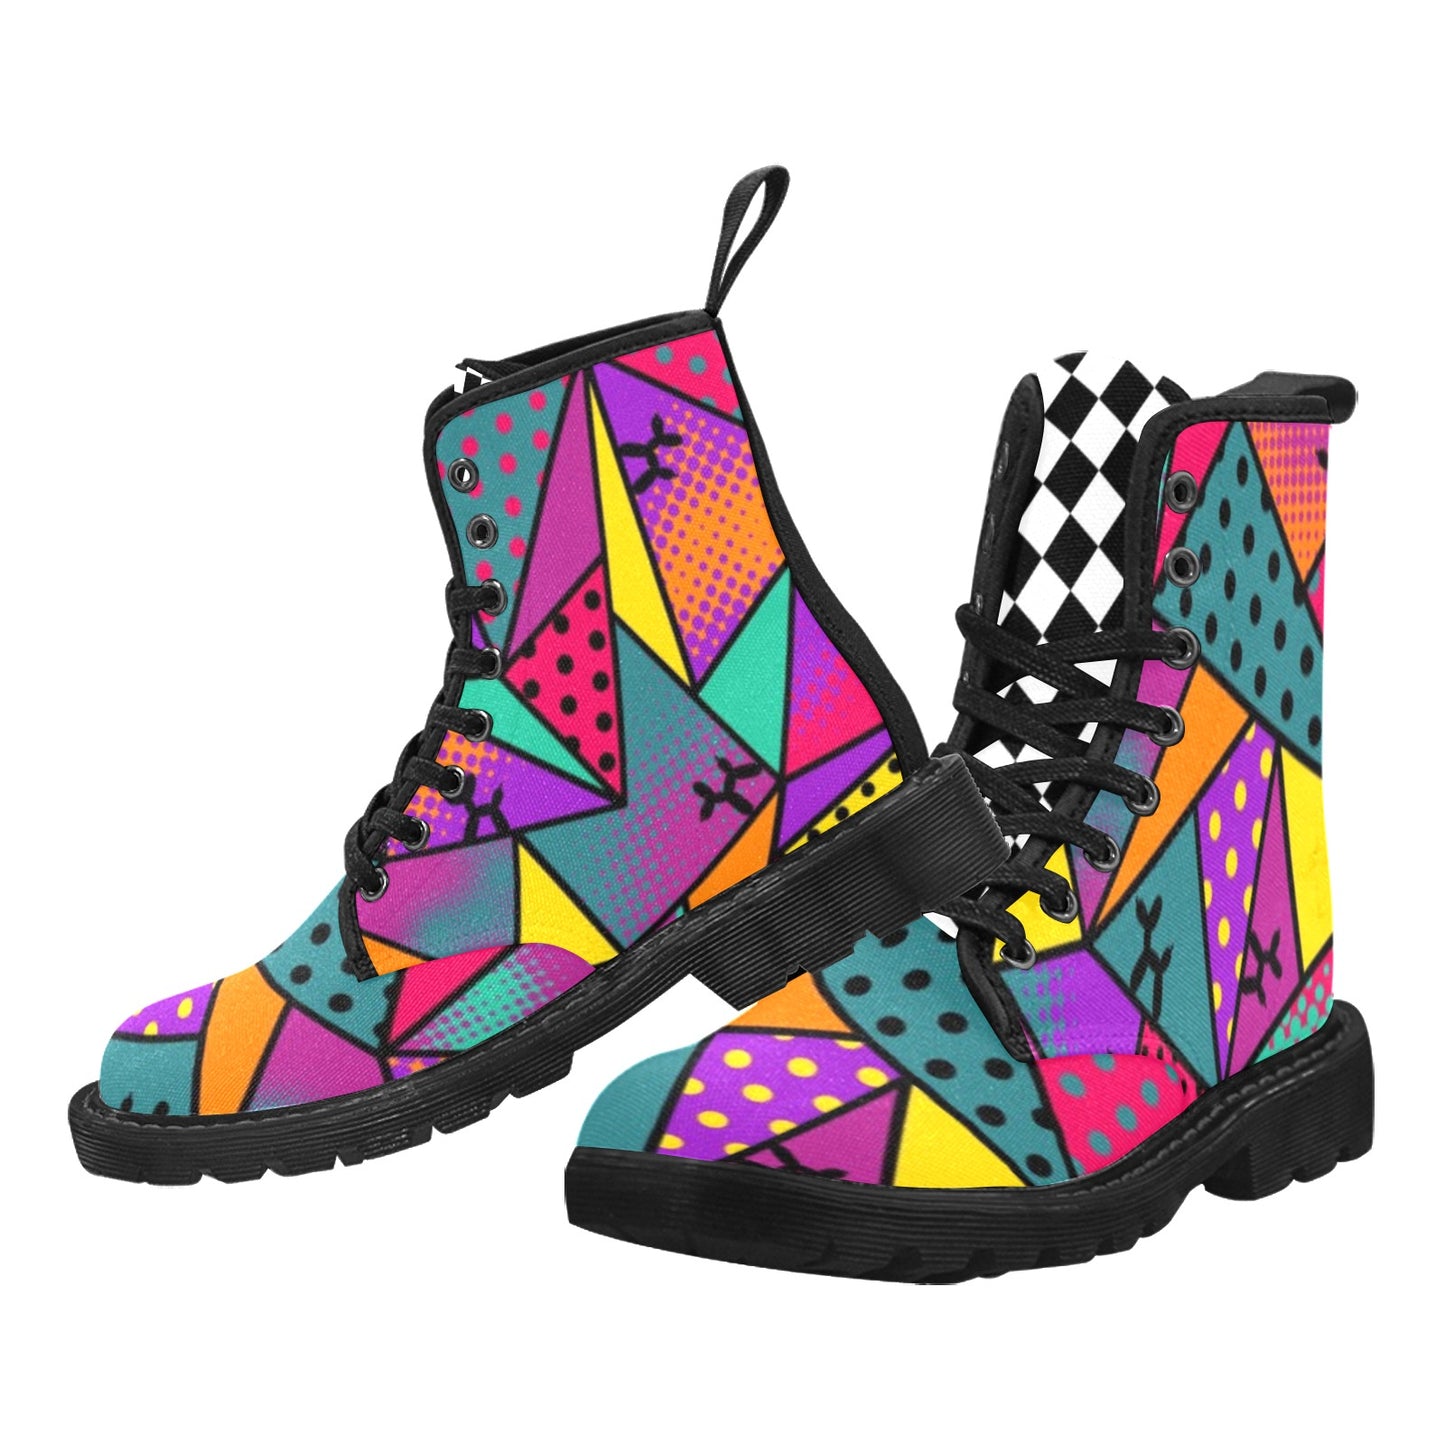 Lolly Bag - Women's Ollie Combat Boots (SIZE US6.5-12)